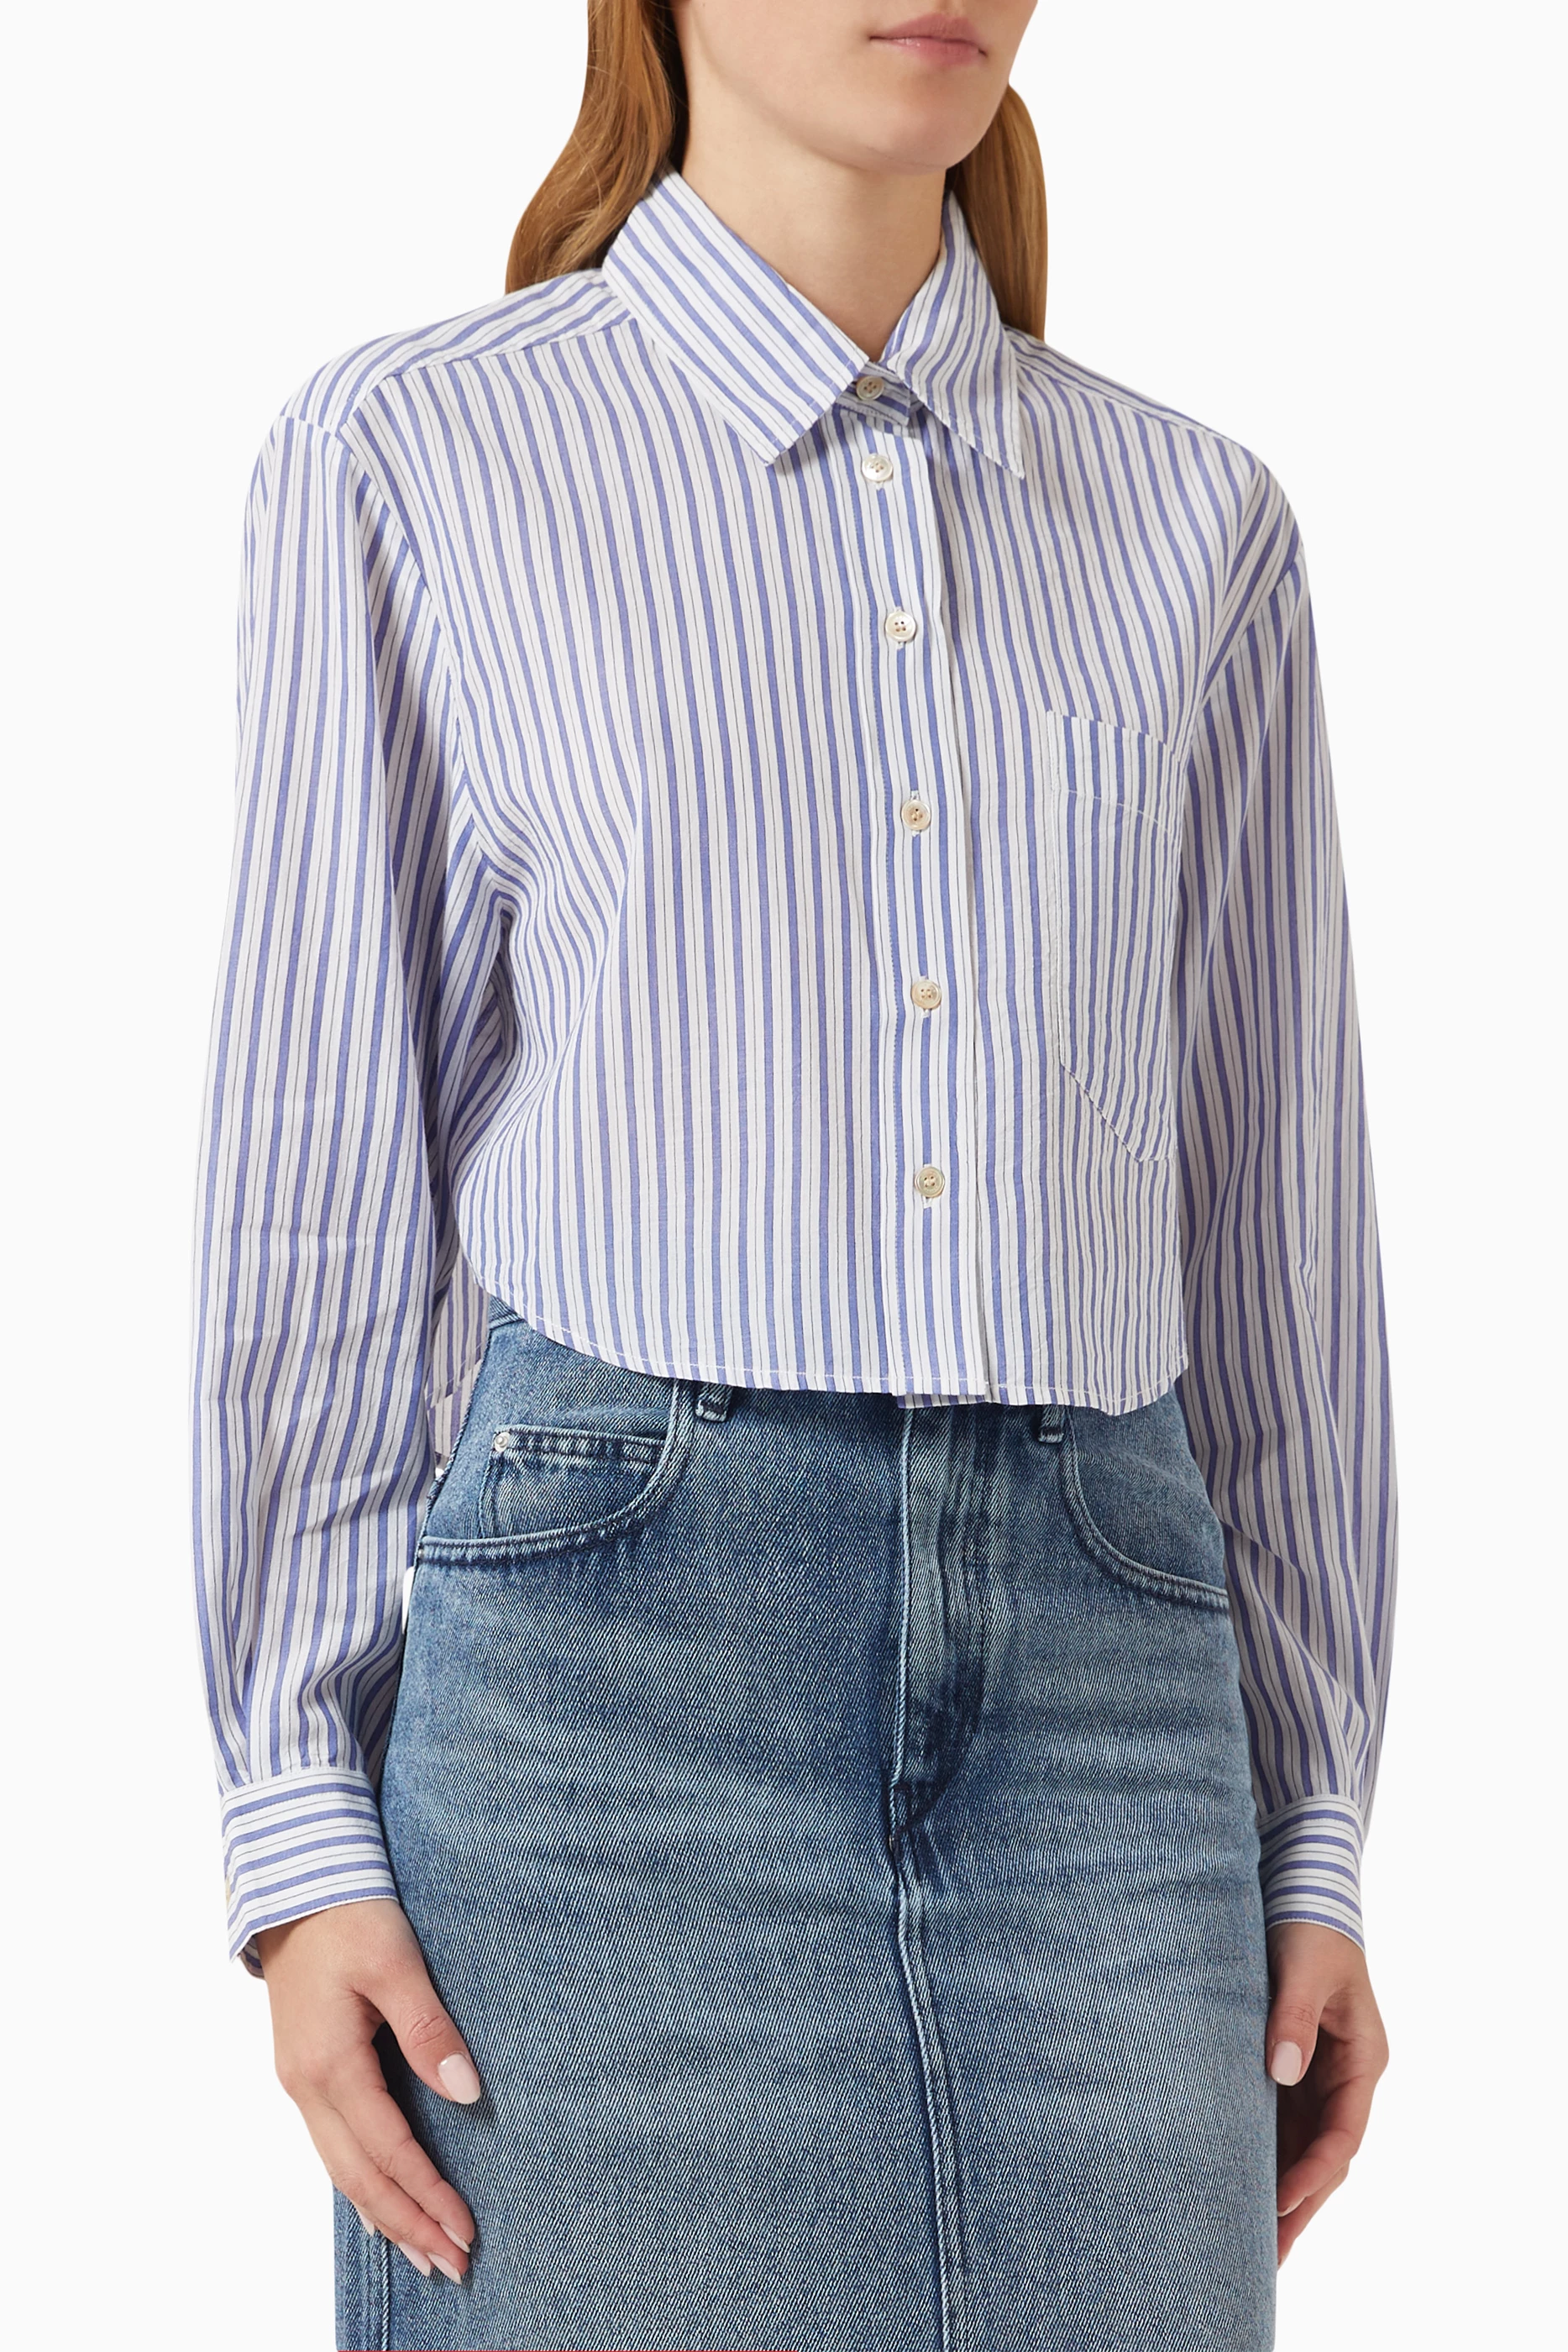 Buy Isabel Marant Etoile Blue Eliora Striped Shirt in Cotton for